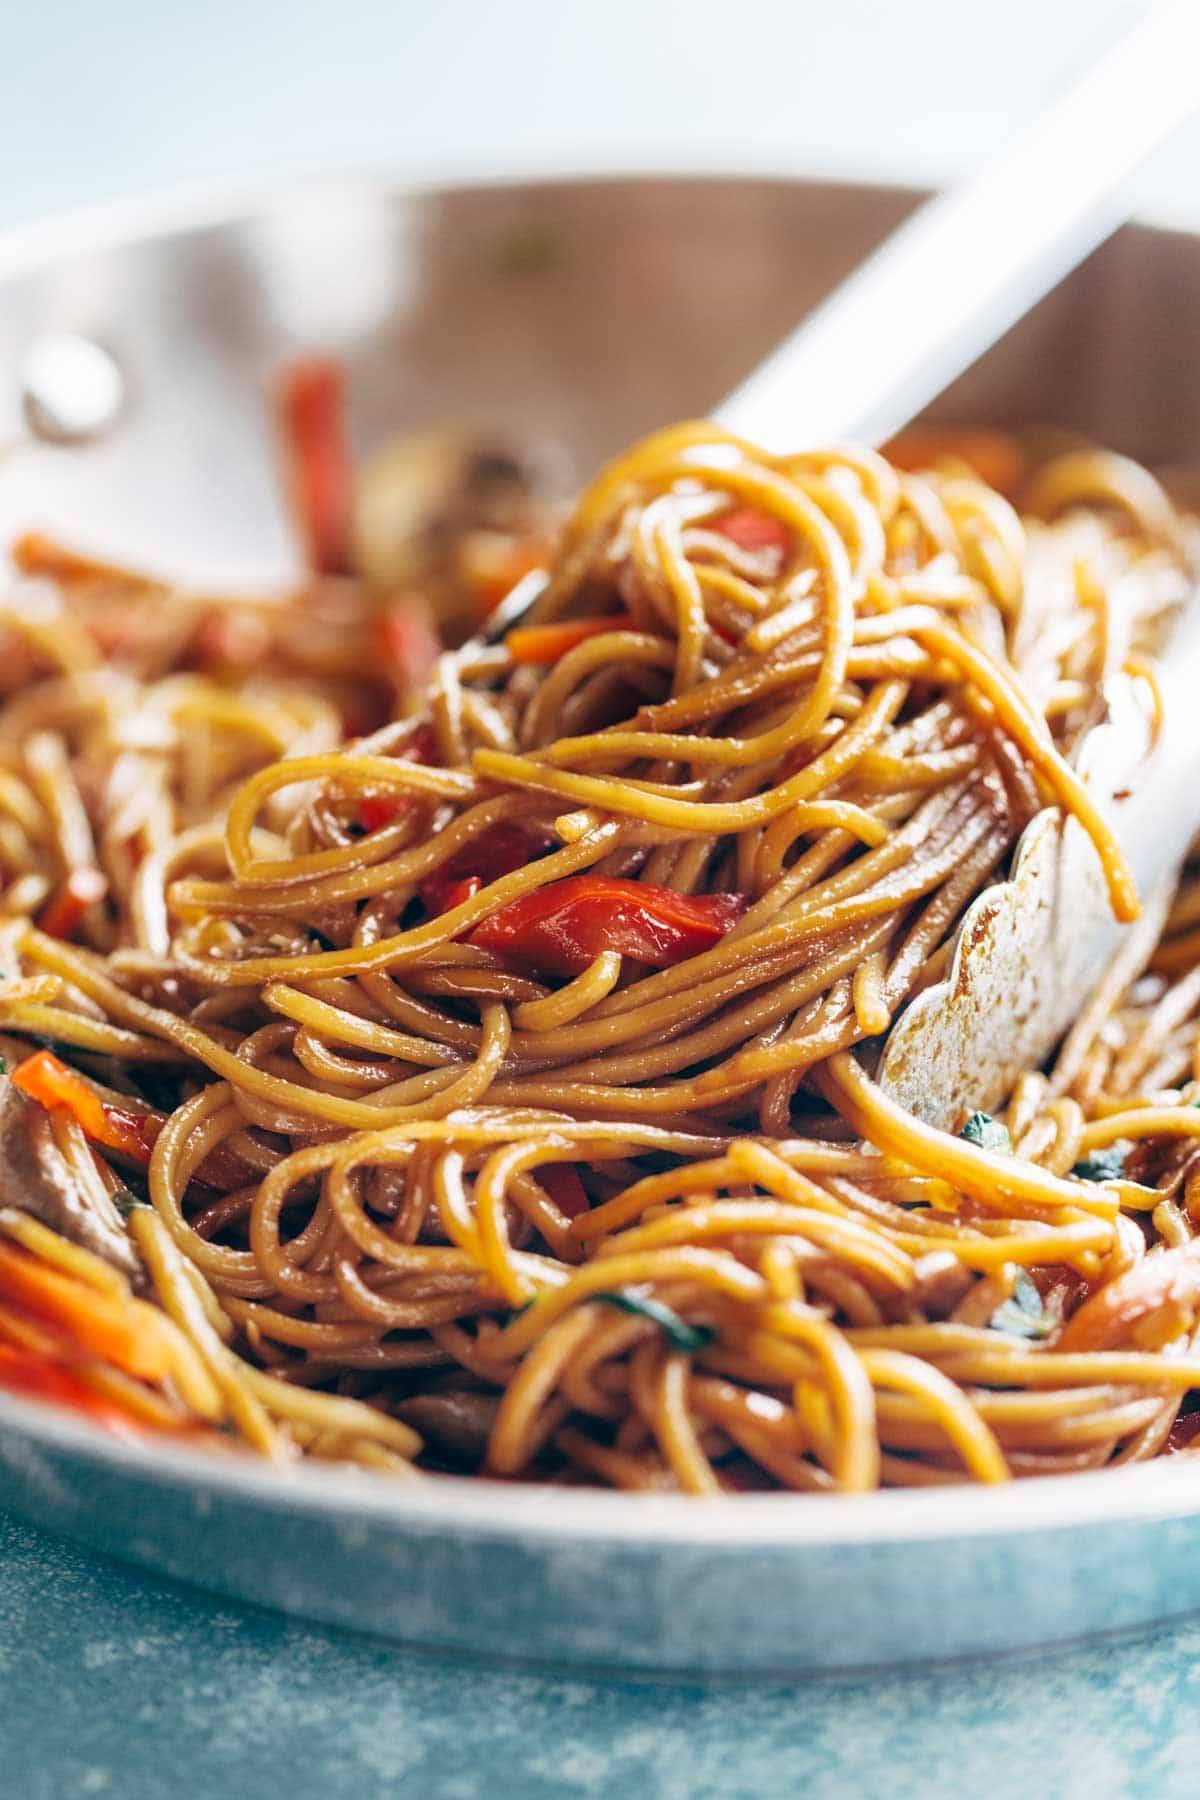 15 Minute Lo Mein! A super easy go-to for a quick Asian noodle stir fry that comes together in just 15 minutes. | pinchofyum.com